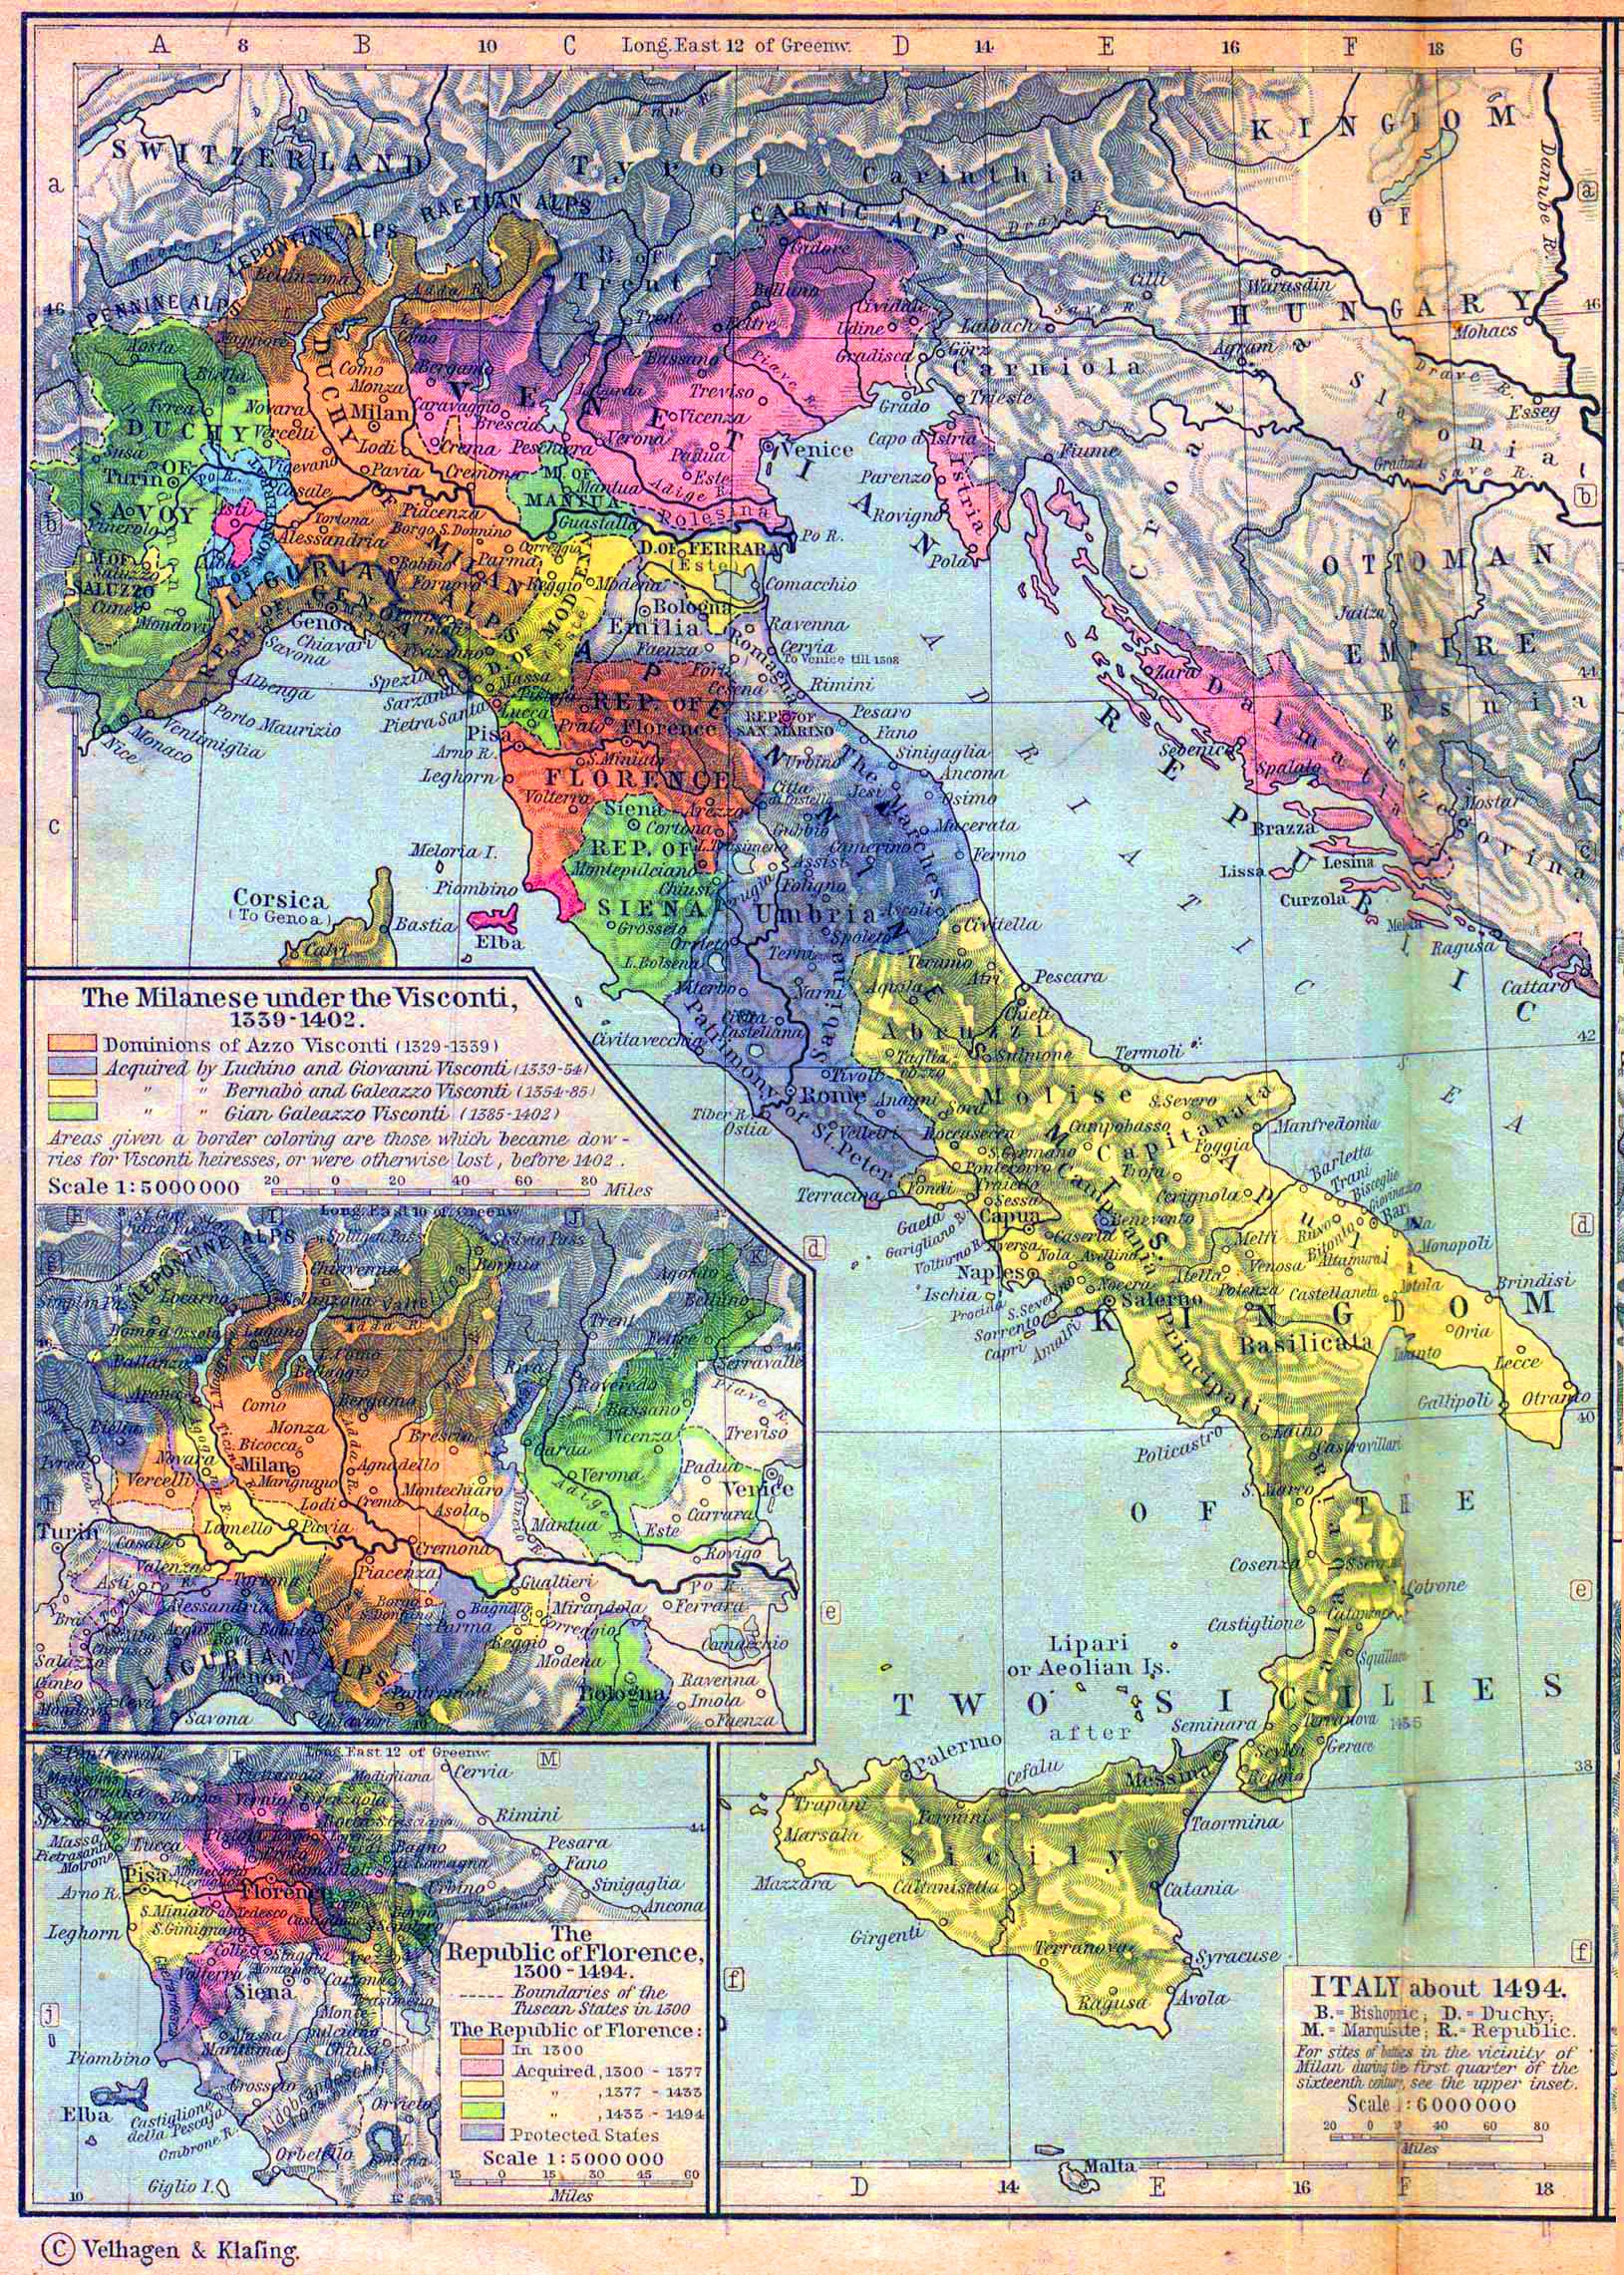 Map of Italy about 1494. Insets: The Milanese under the Visconti, 1339-1402. The Republic of Florence, 1300-1494.